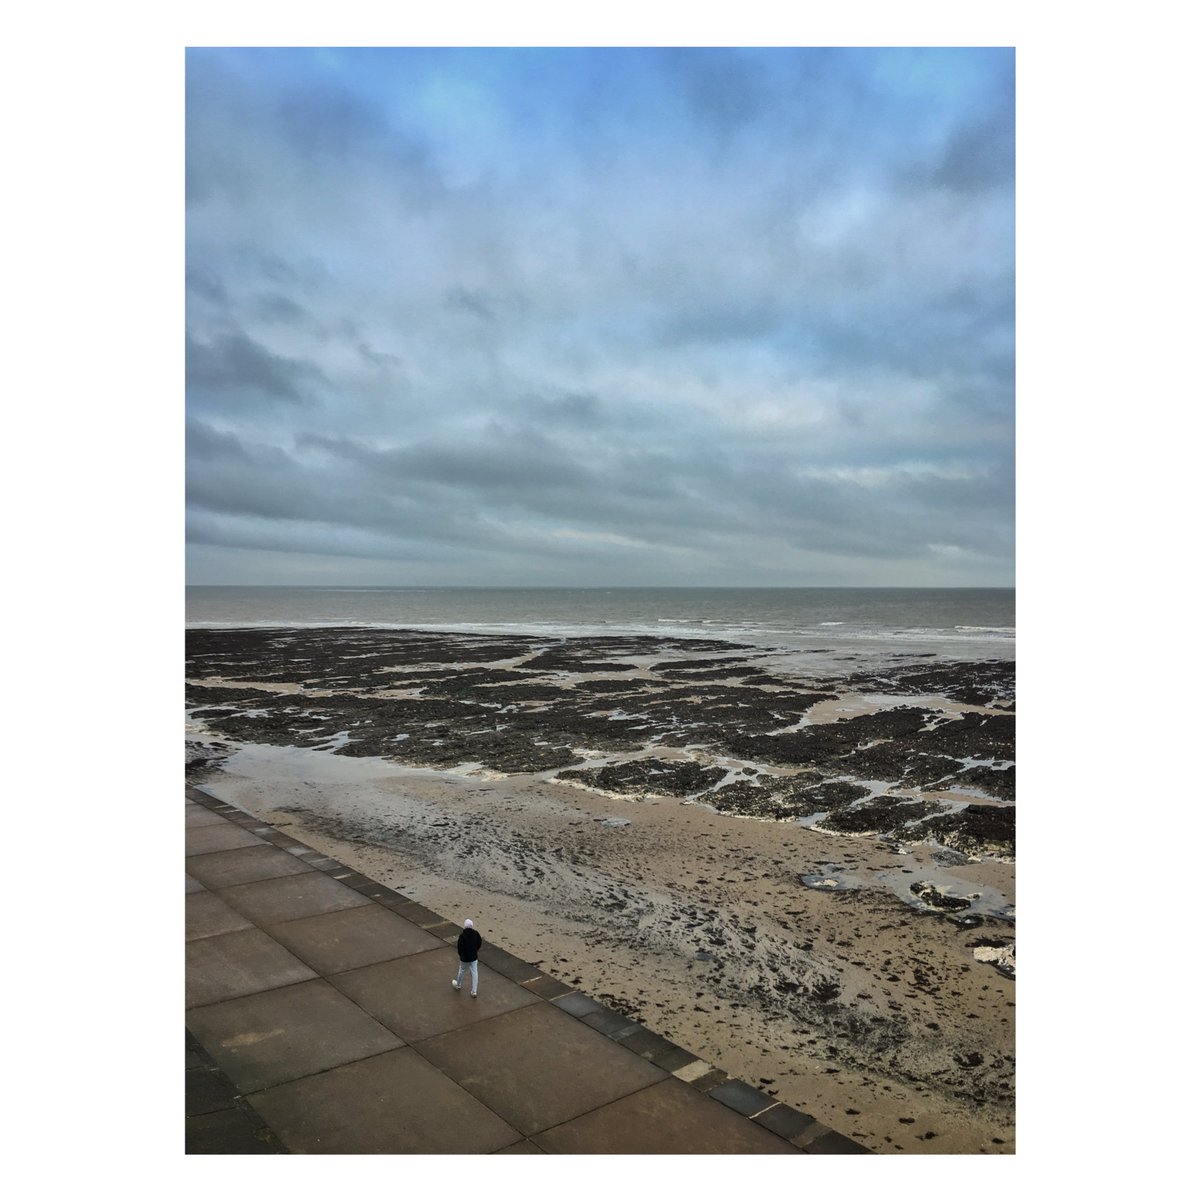 Cold, bleak and grey. Just lovely for a nice solitary walk and taking photos, #margate #beauty #badweather #coastalwalks #photography #seaside #alone #solitude #winter #thisisengland #muted #colours